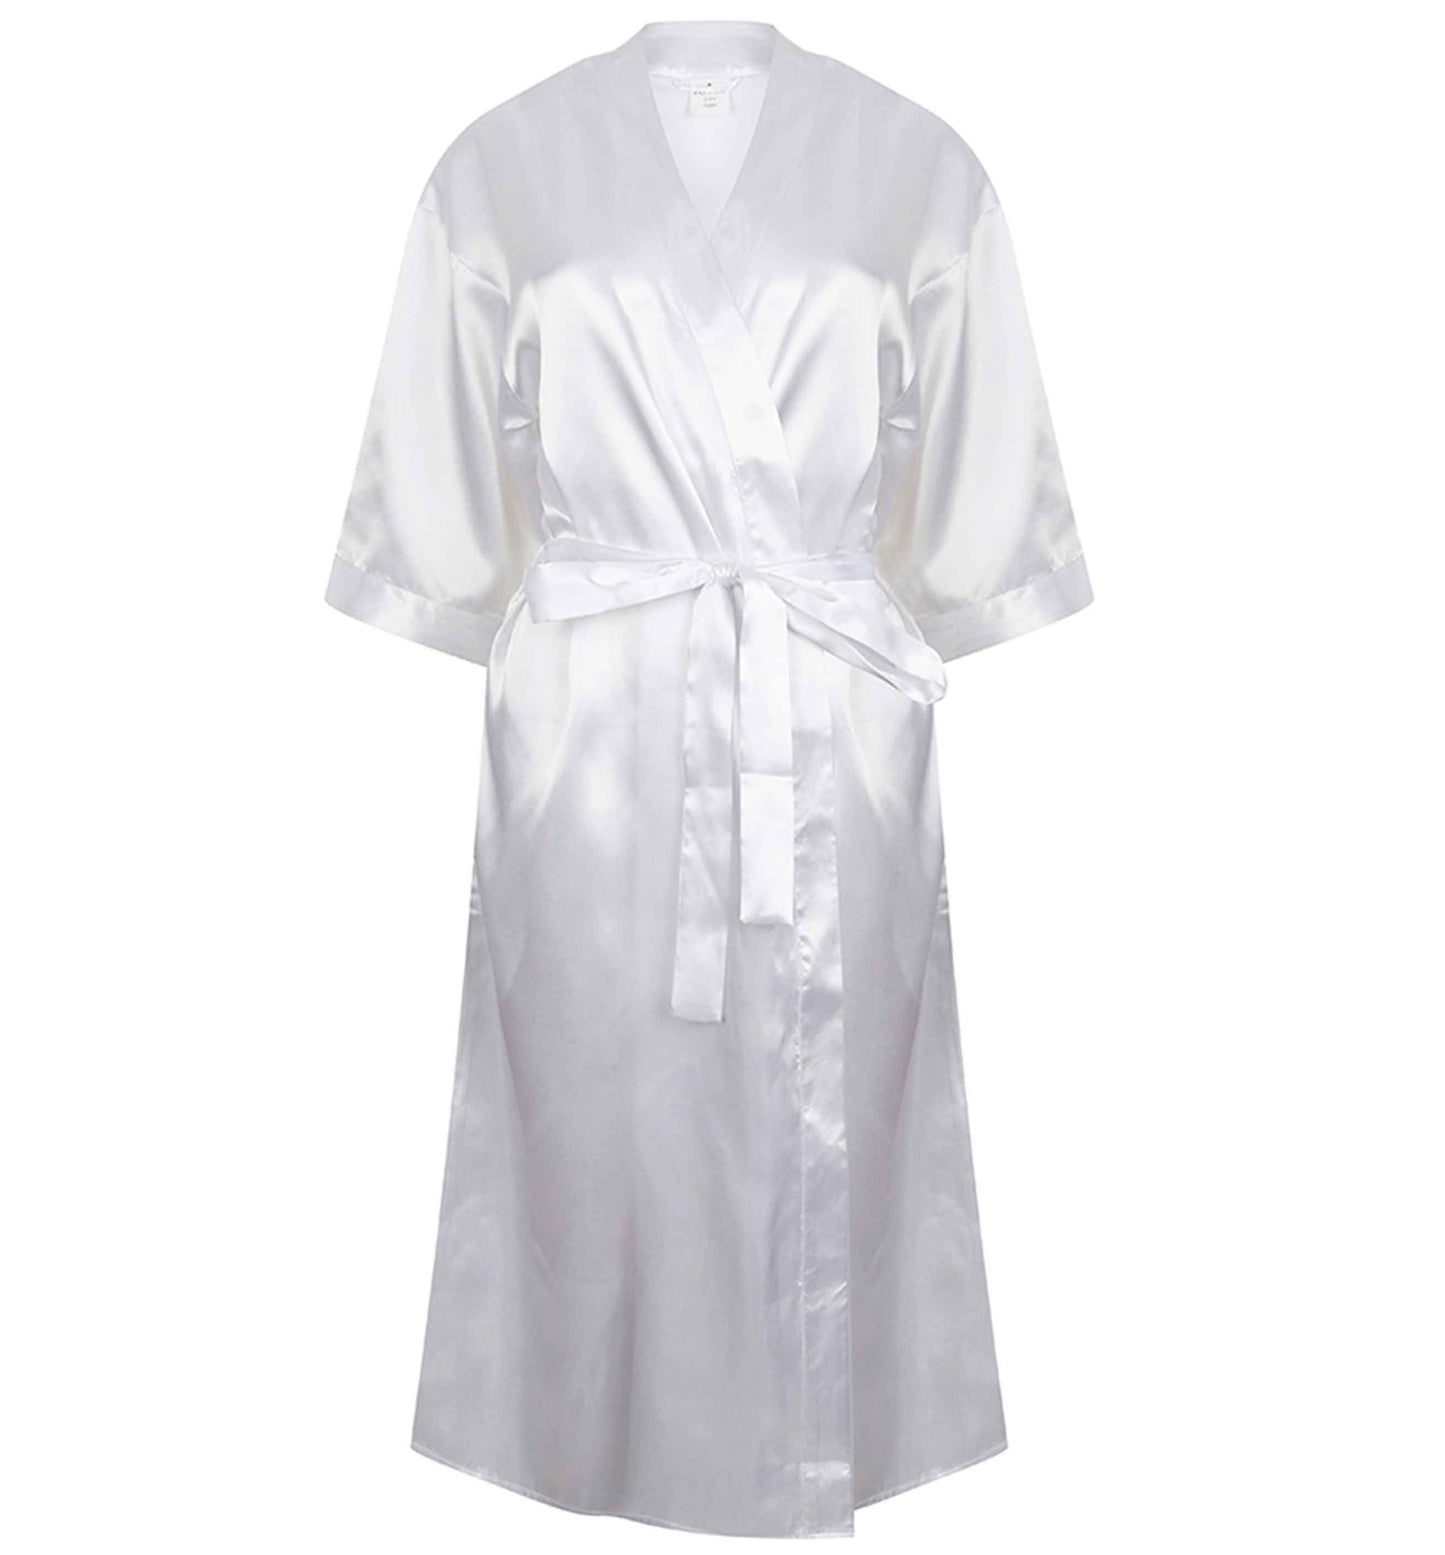 All I want for Christmas is a labrador | 8-18 | Kimono style satin robe | Ladies dressing gown